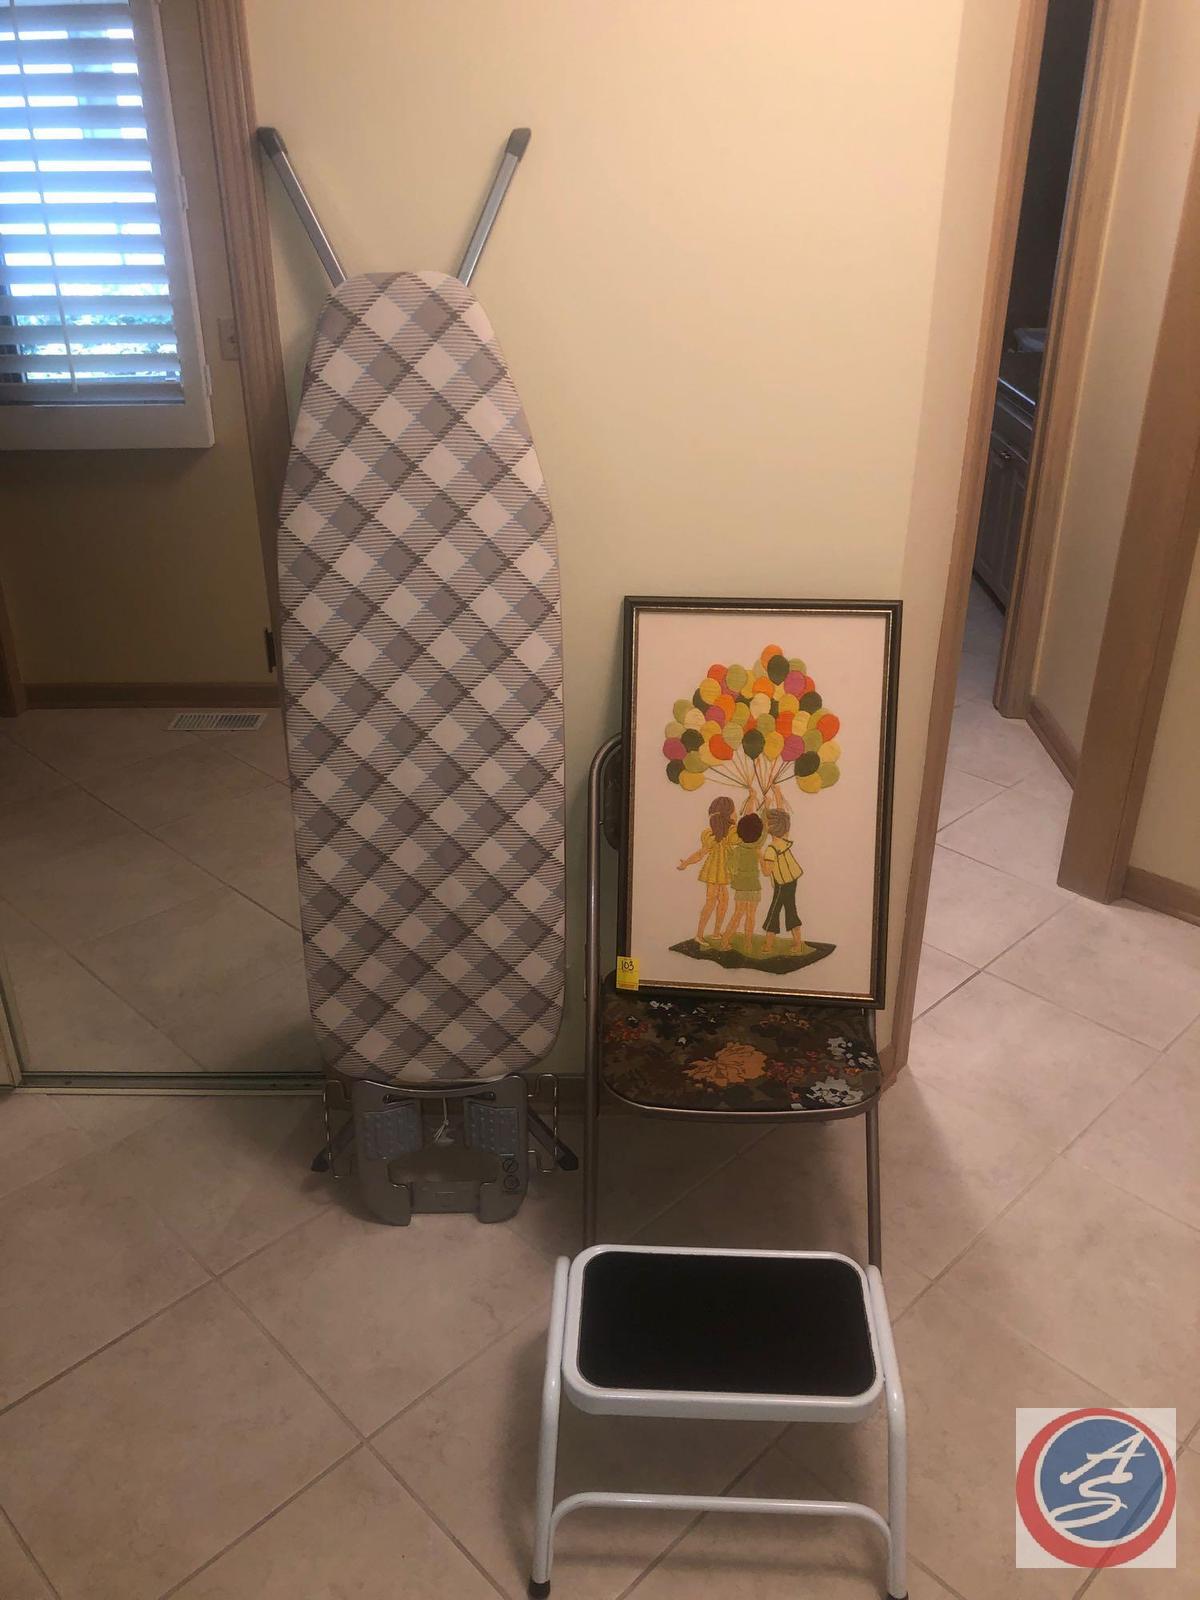 Ironing Board, Step Stool and Embroidered Framed Artwork and Upholstered Metal Chair